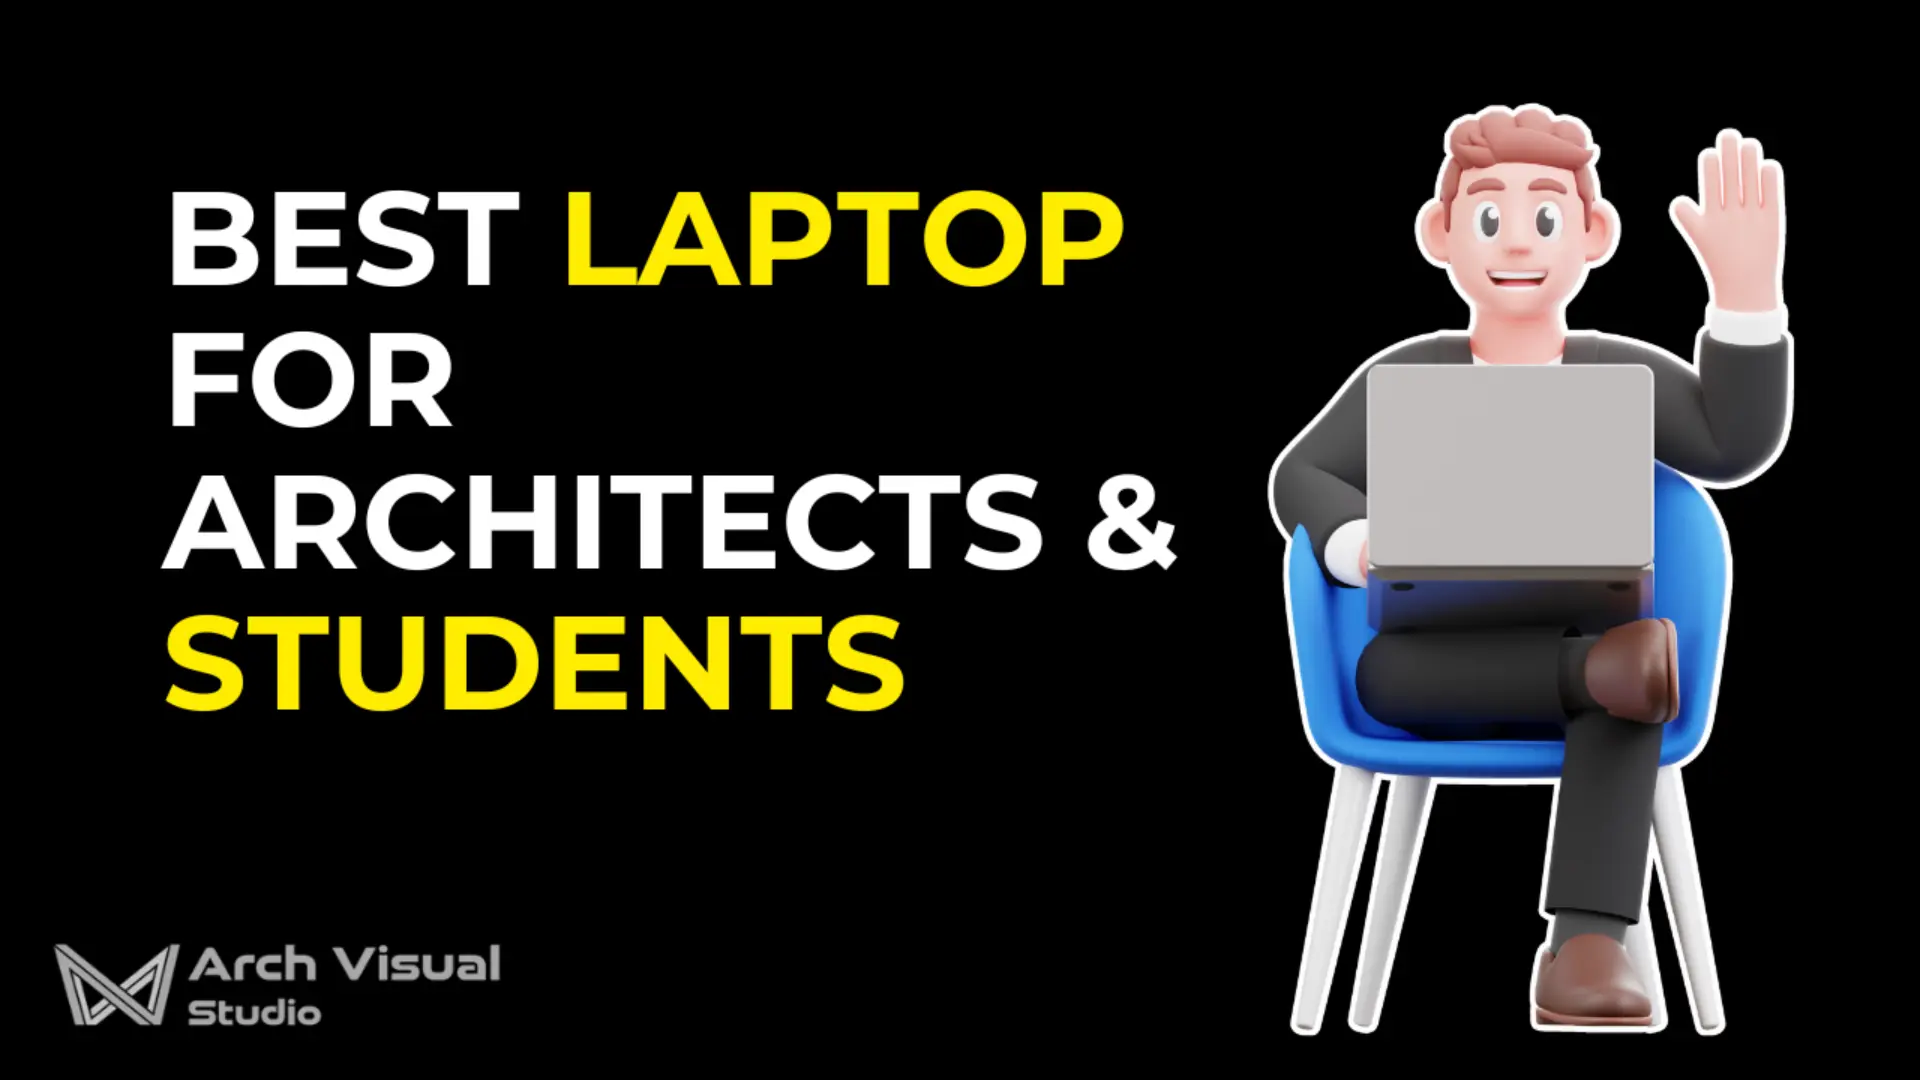 Best laptop for Architects & students